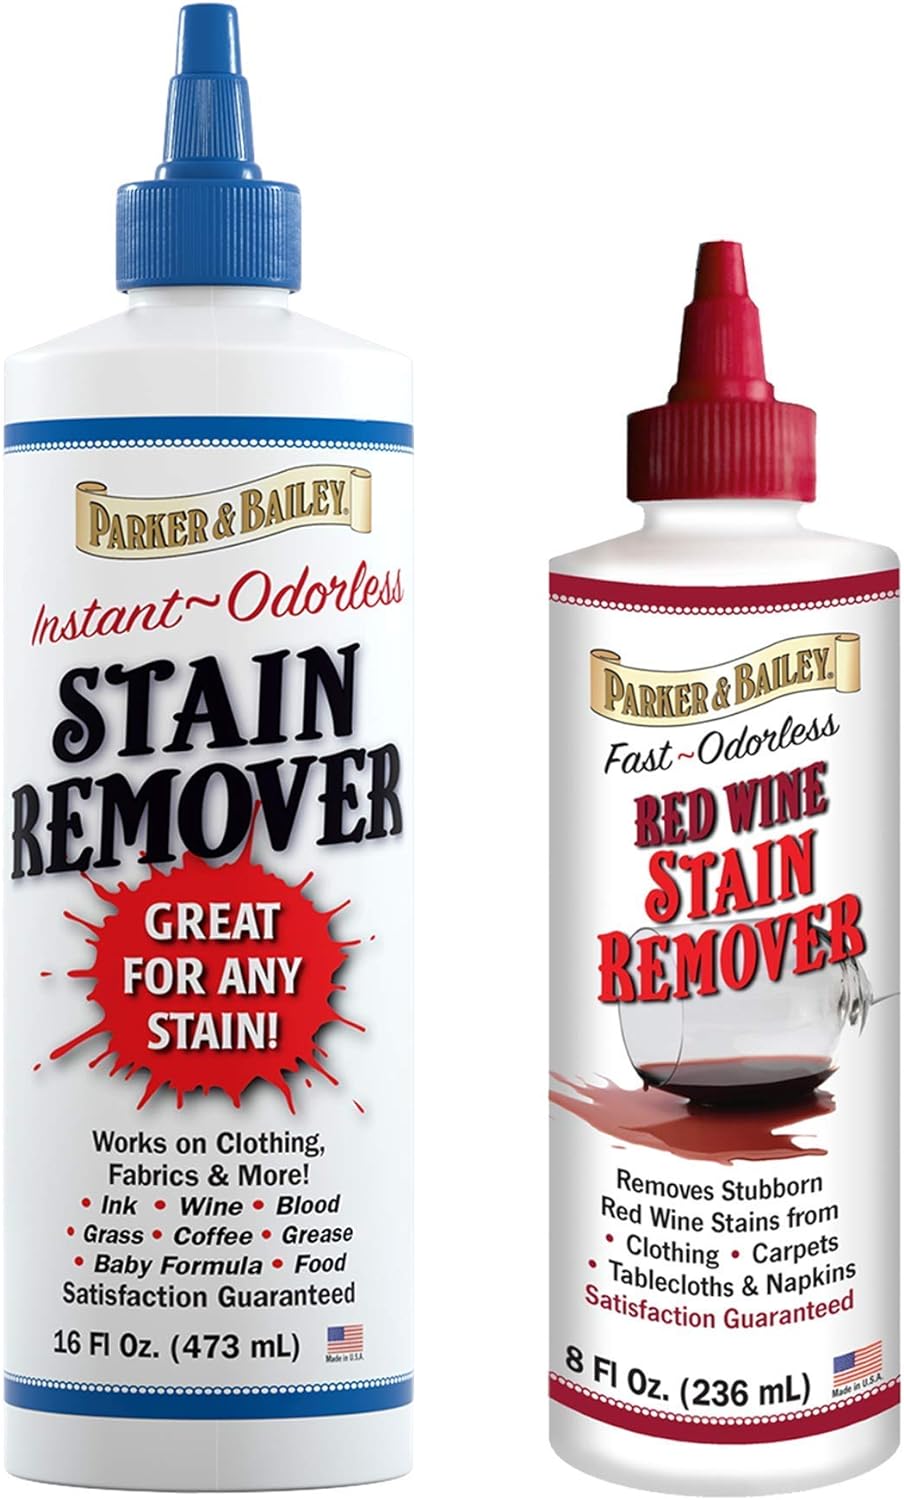 Parker and Bailey Stain Remover 16oz Bundled with Red Wine Stain Remover 8oz